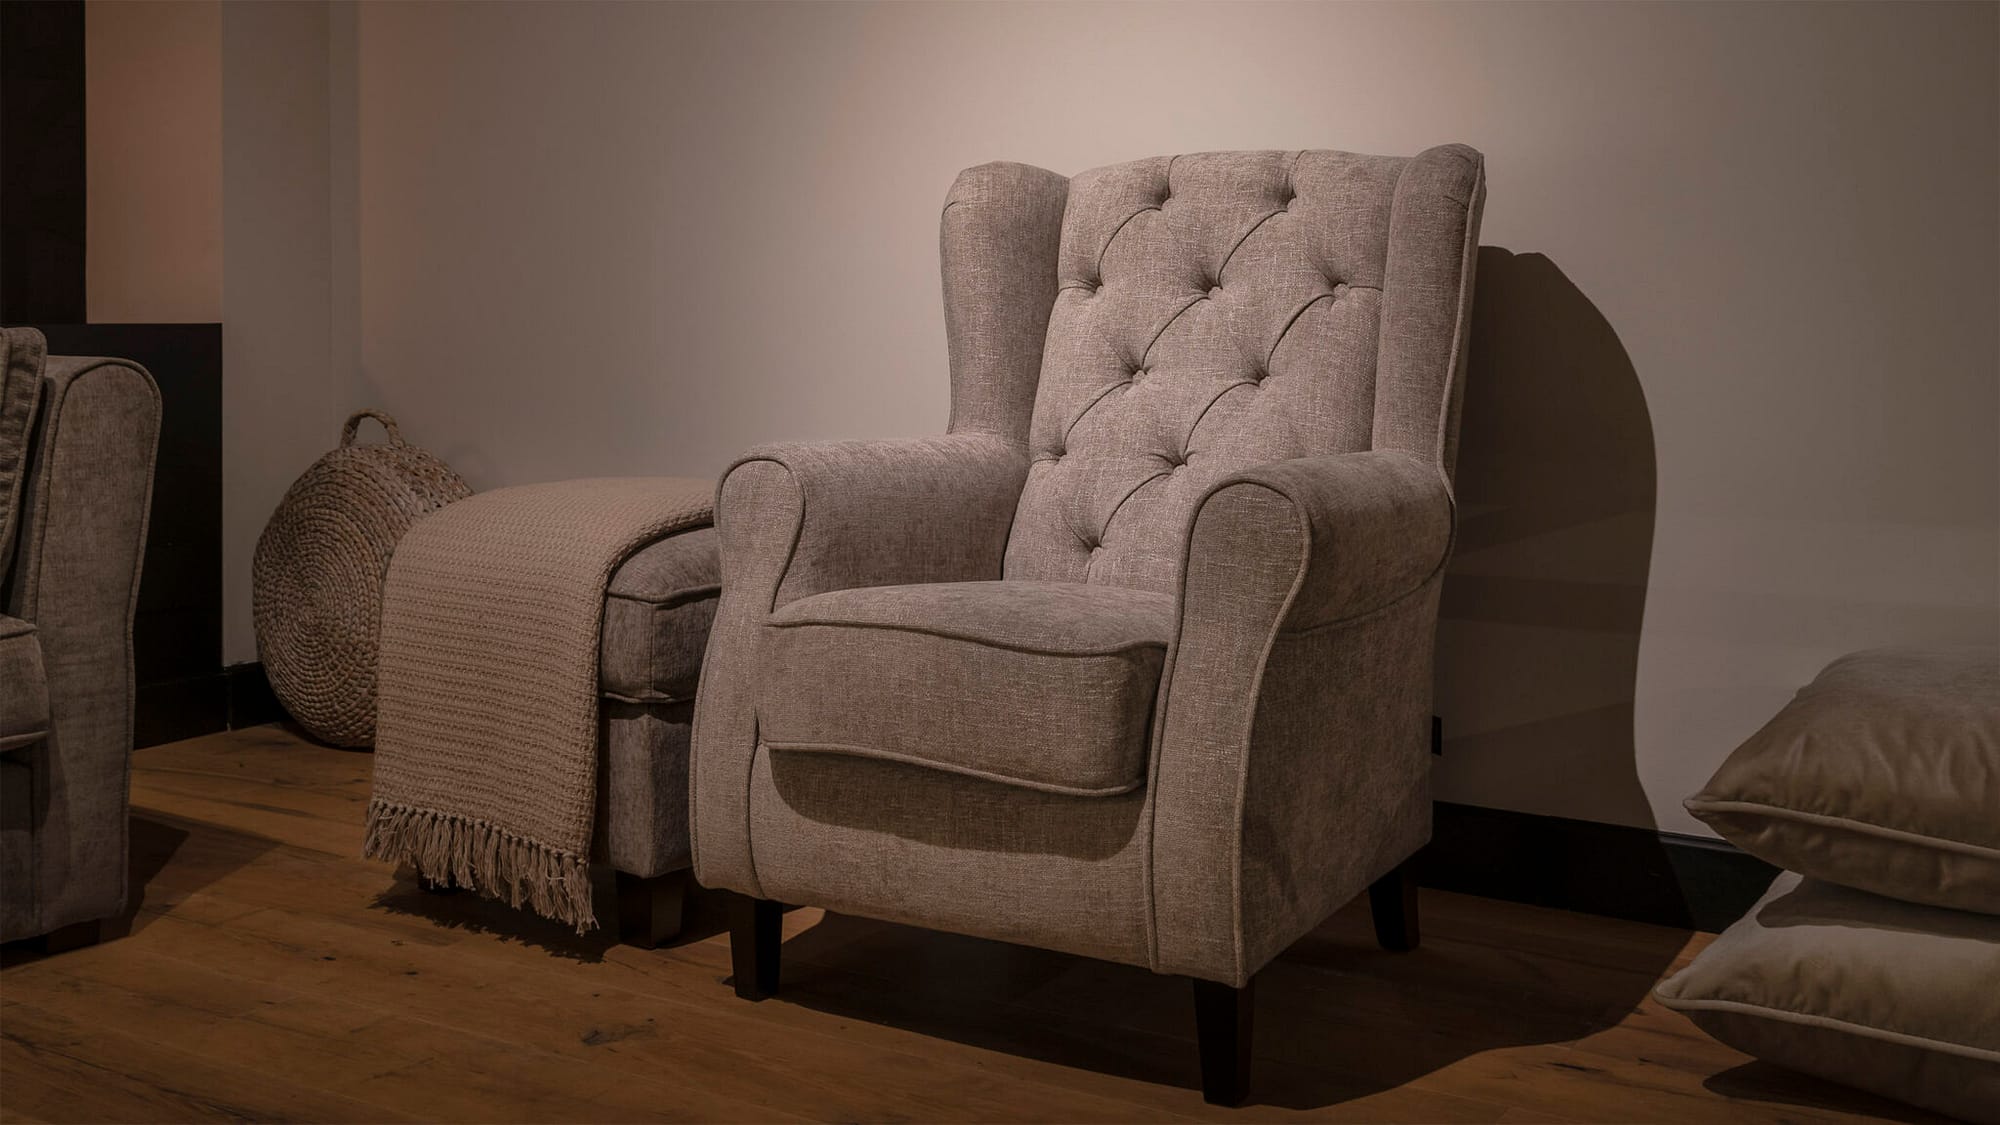 UrbanSofa Palermo Fauteuil Belize Taupe Website scaled